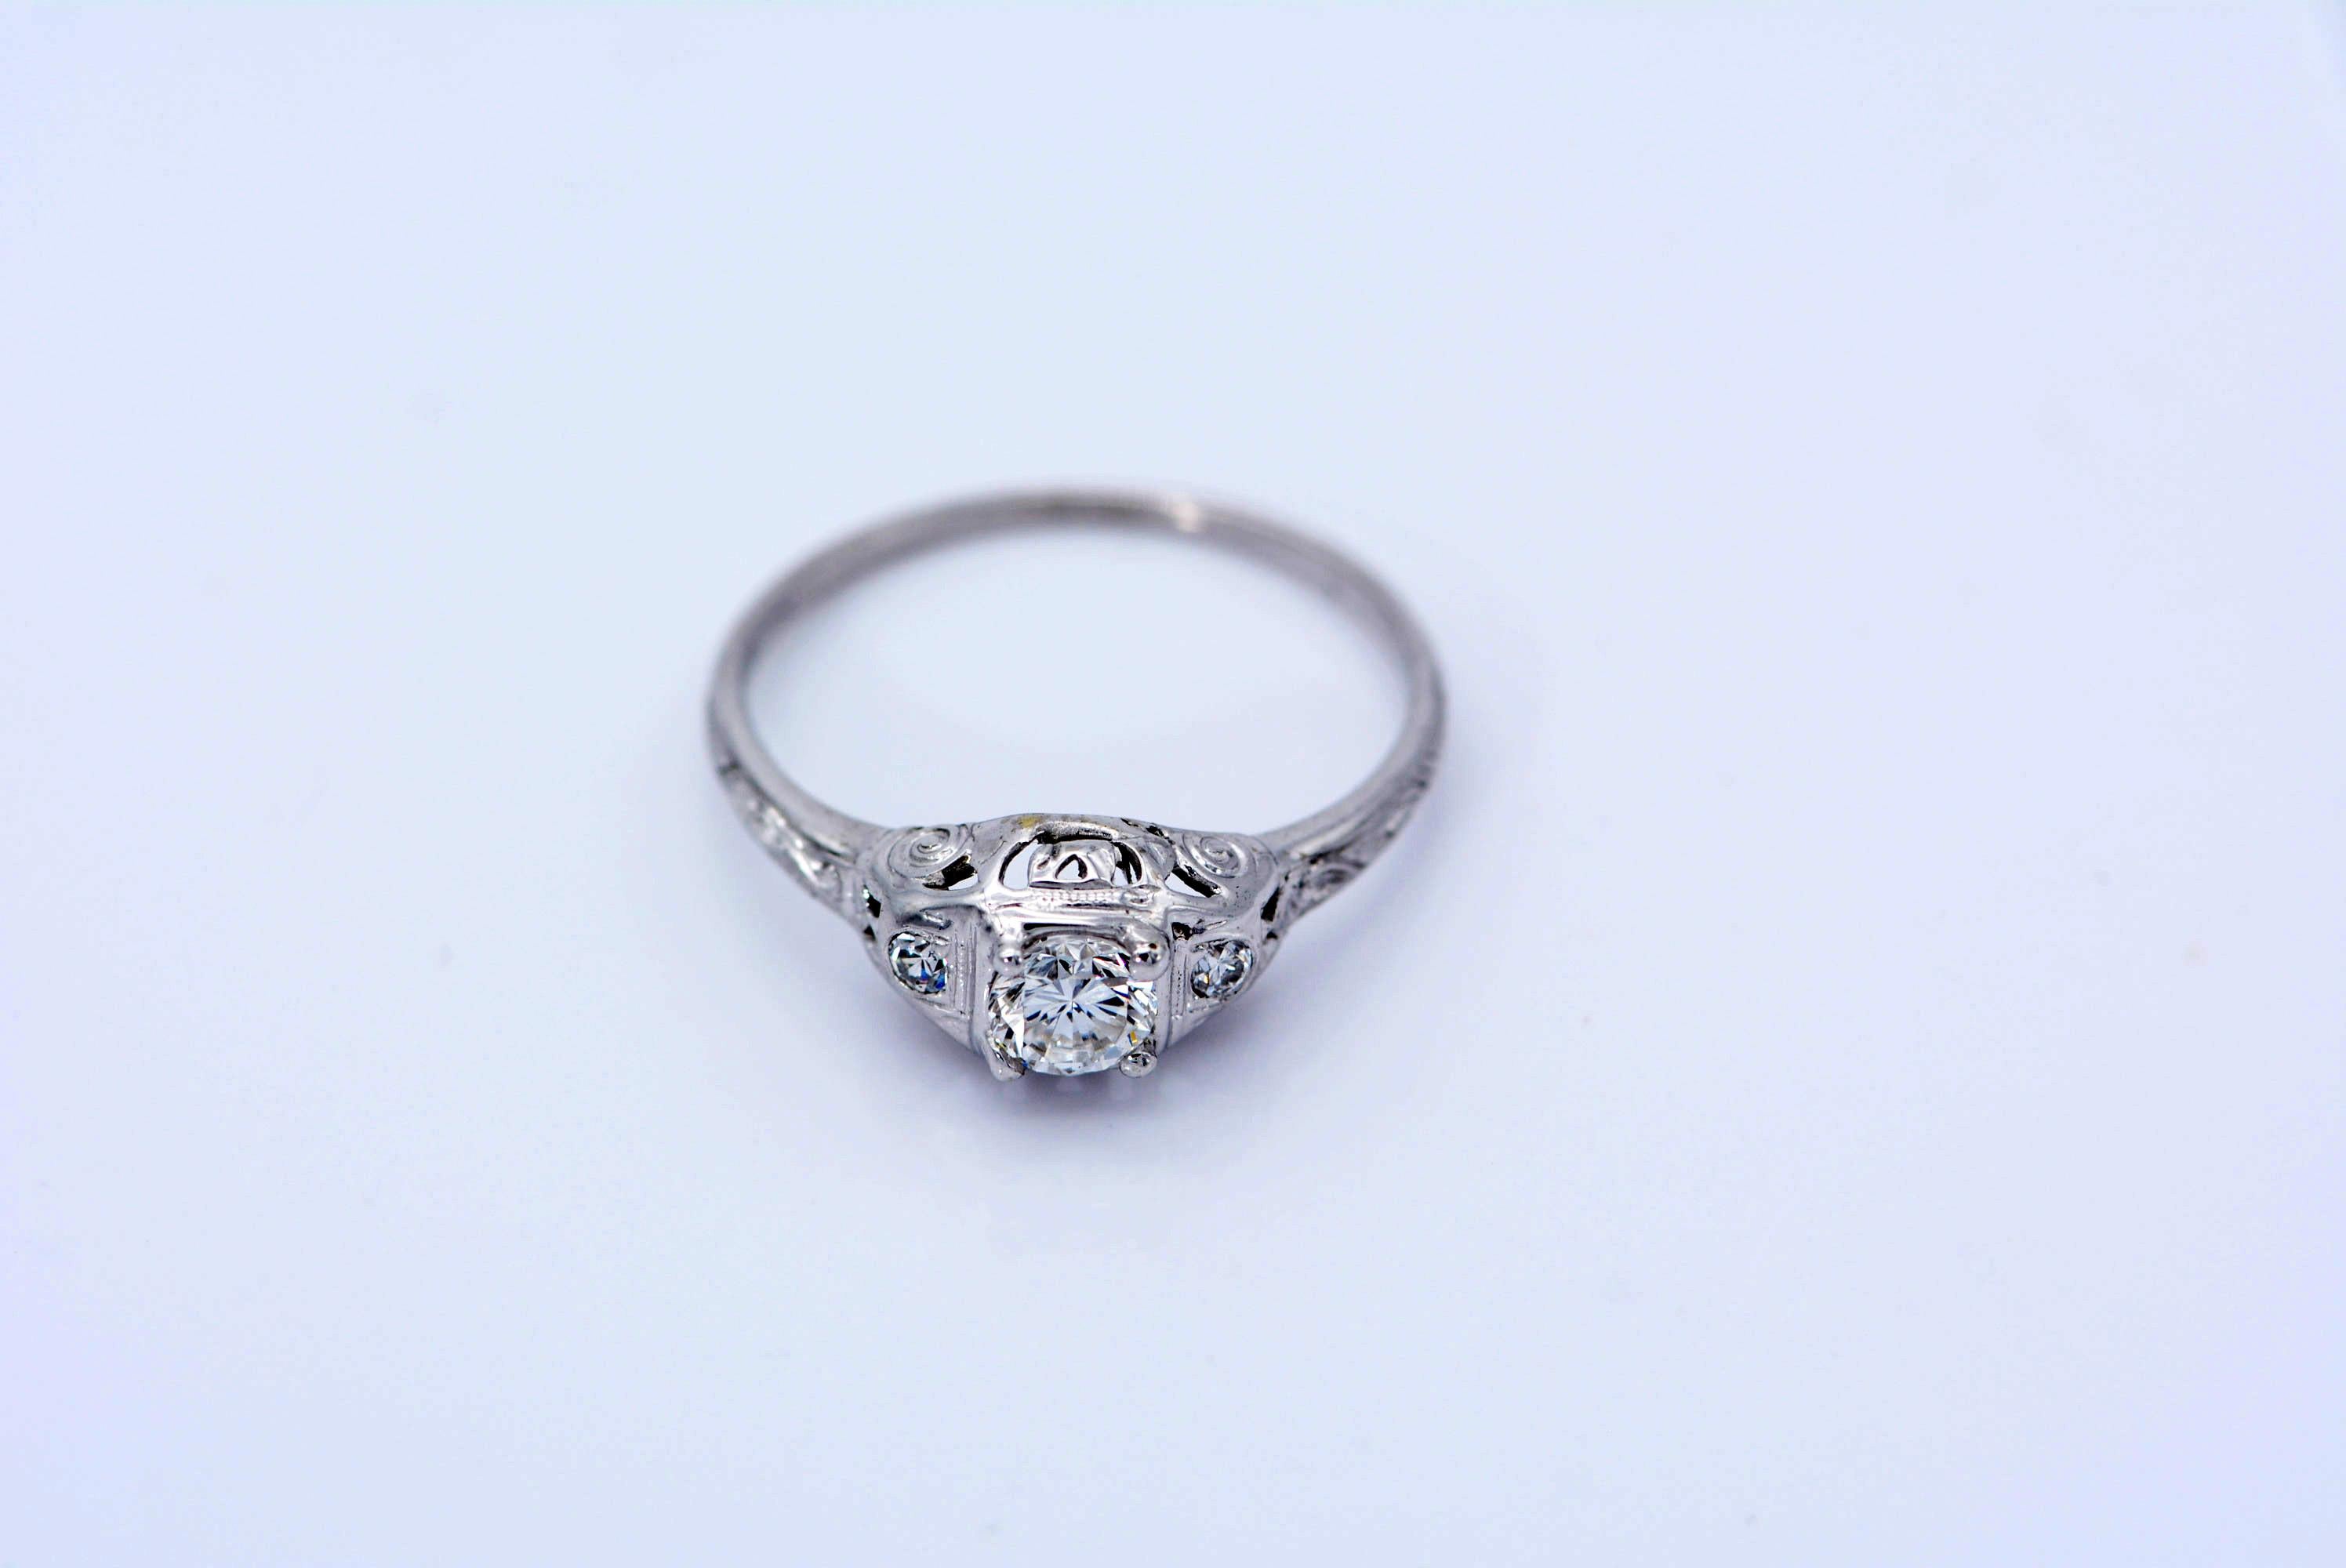 GIA Certified 0.30 Carat Diamond Ring 18 Karat White Gold by Birks In Excellent Condition For Sale In Aurora, Ontario